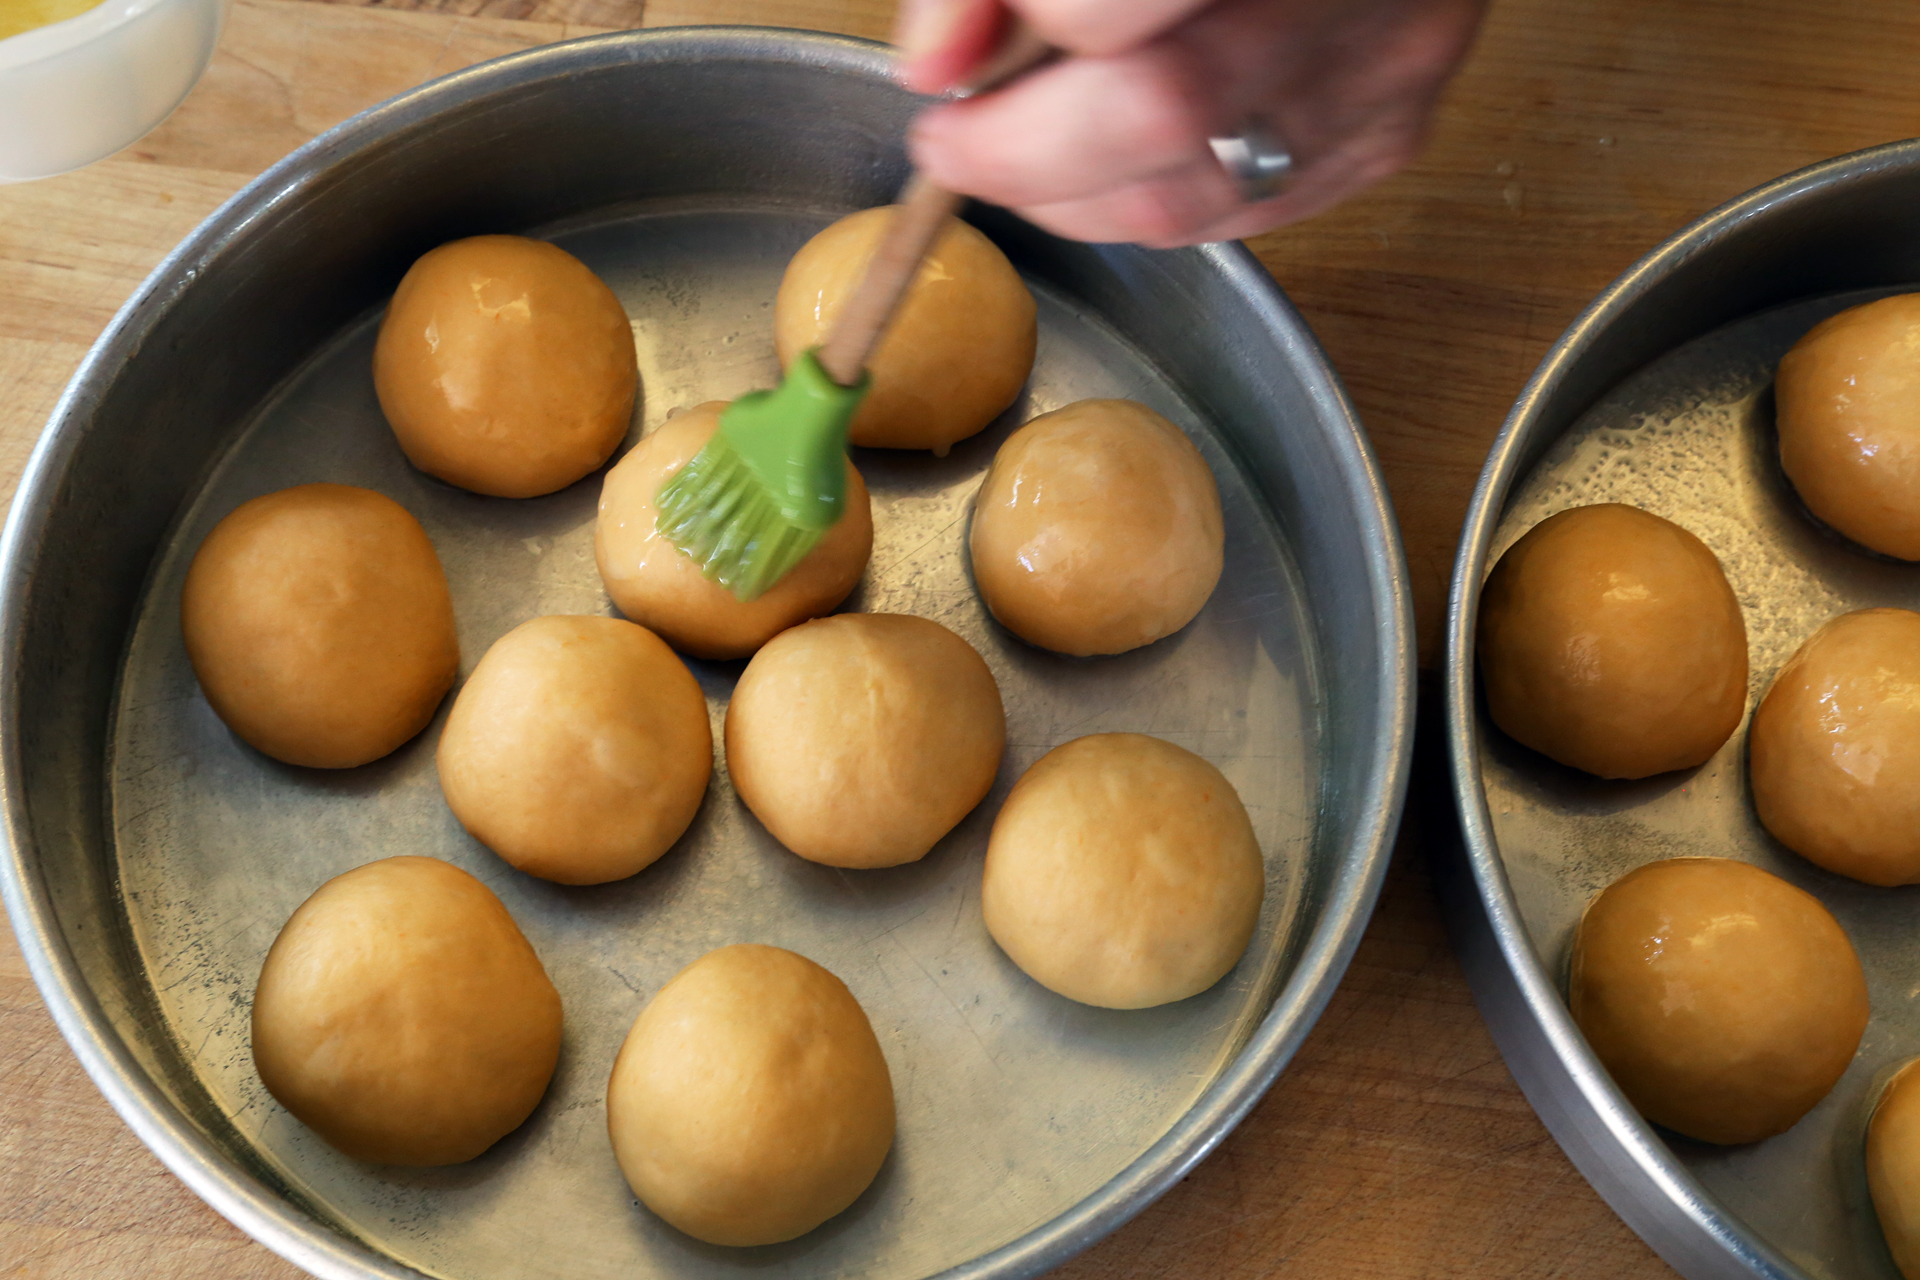 Place half of the balls into each prepared cake pan, spacing them evenly. Brush the dough balls with half of the melted butter. 